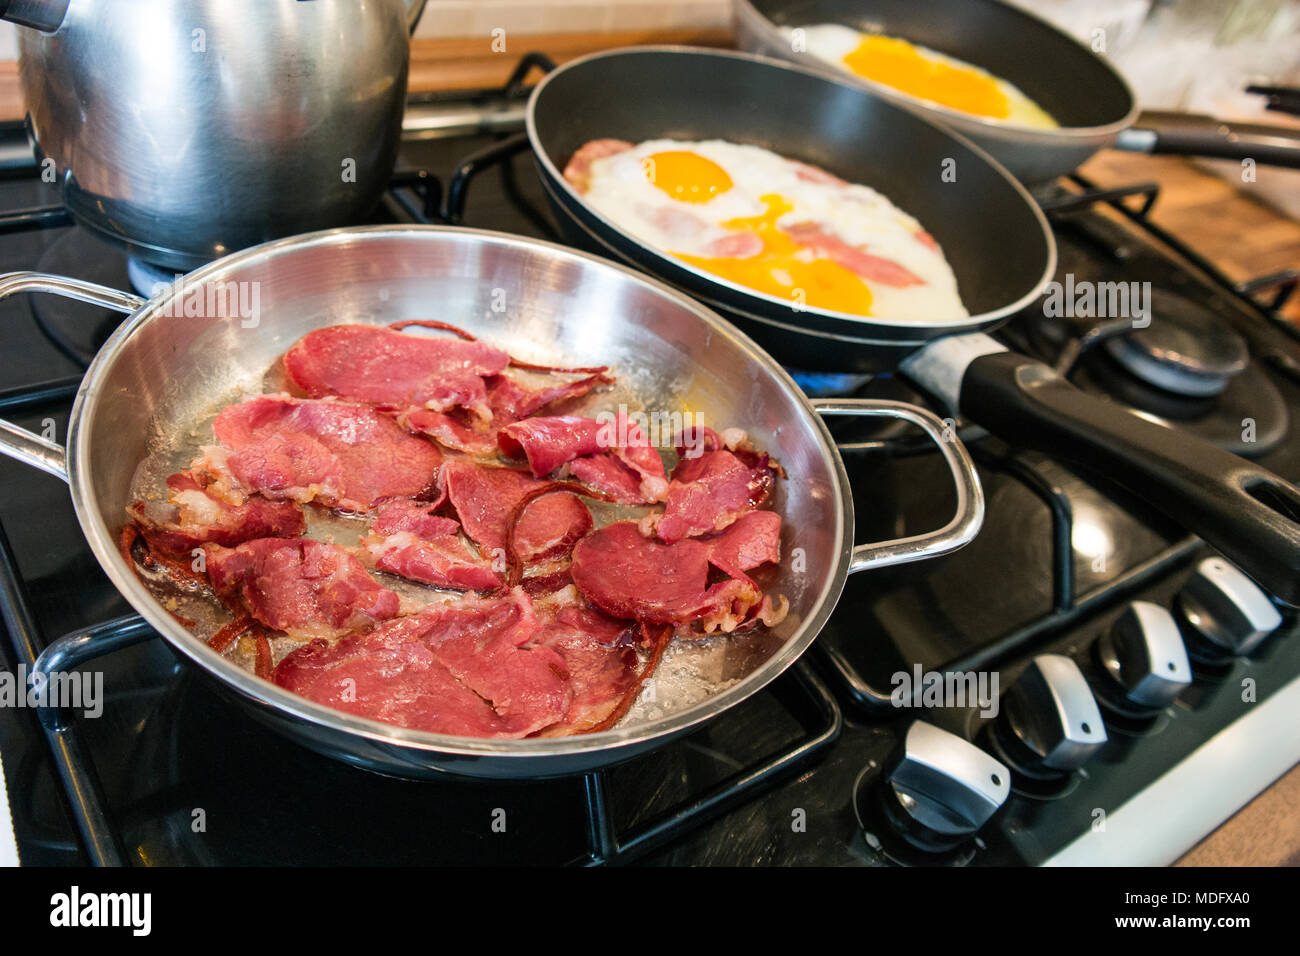 turkish pastirma / pastrami bacon in a frying pan at home Stock Photo